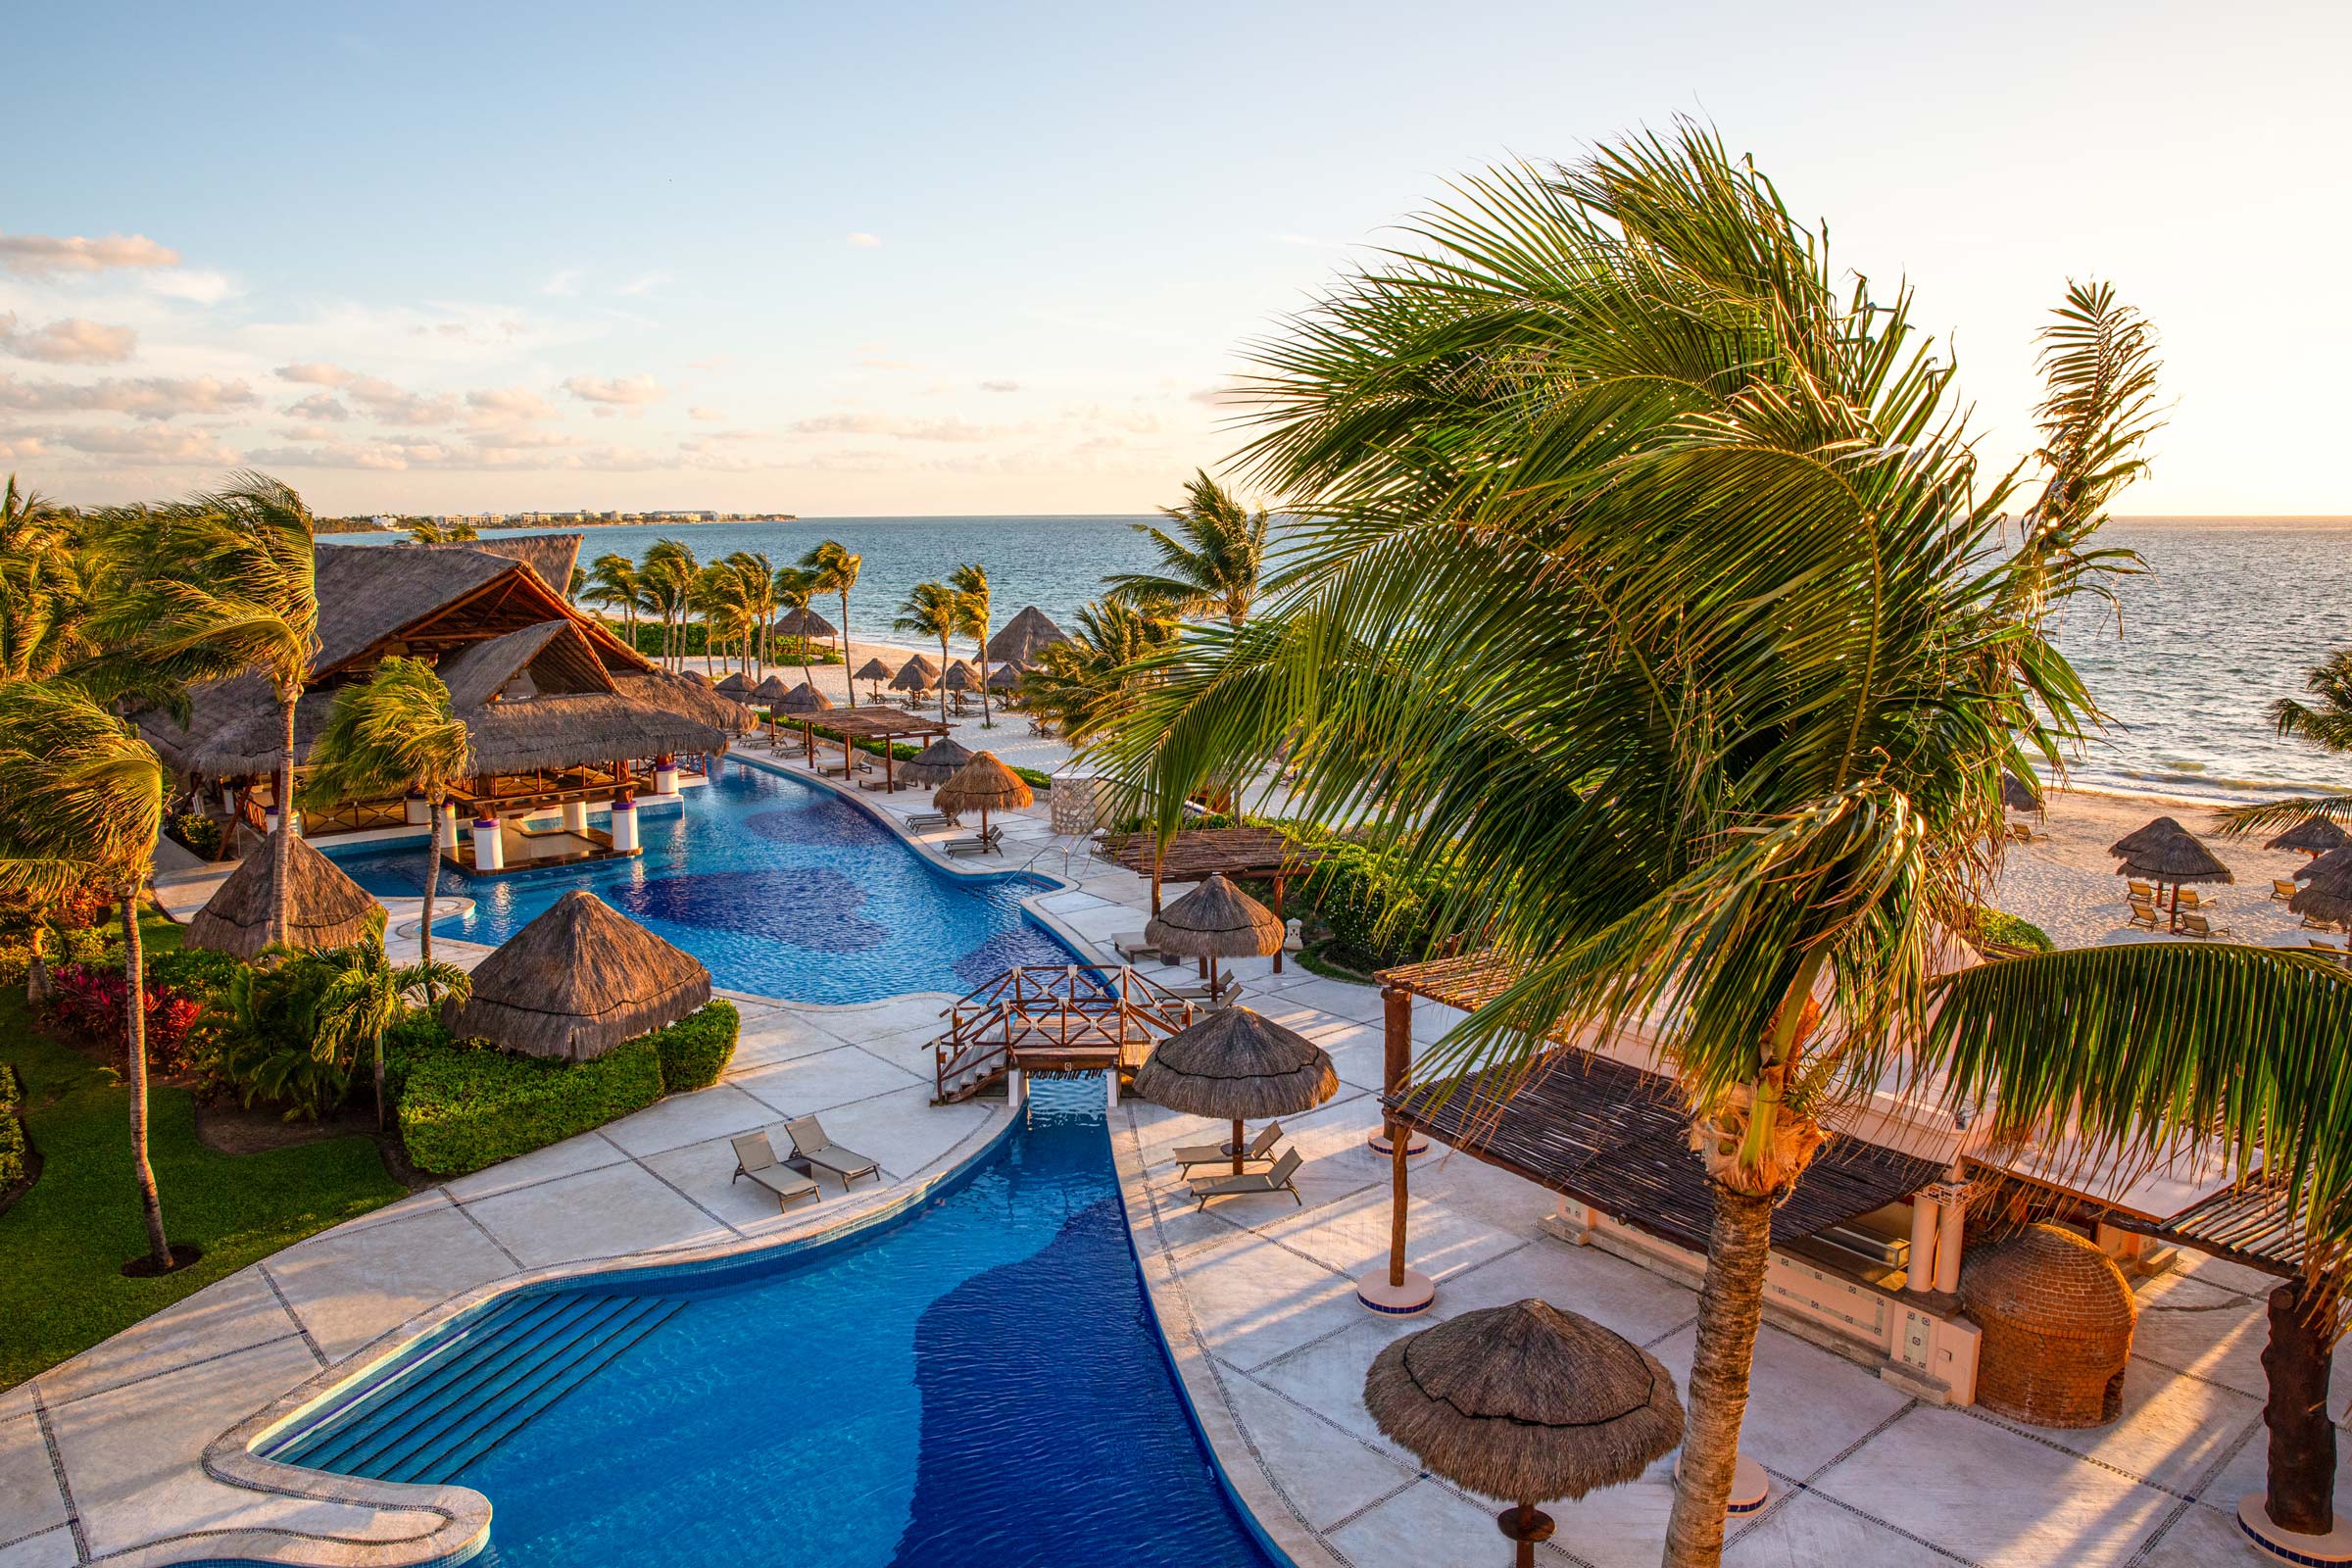 Excellence Riviera Cancun Has Vacation Deals and Promo Codes to Riviera Maya Mexico for Your Next Stay